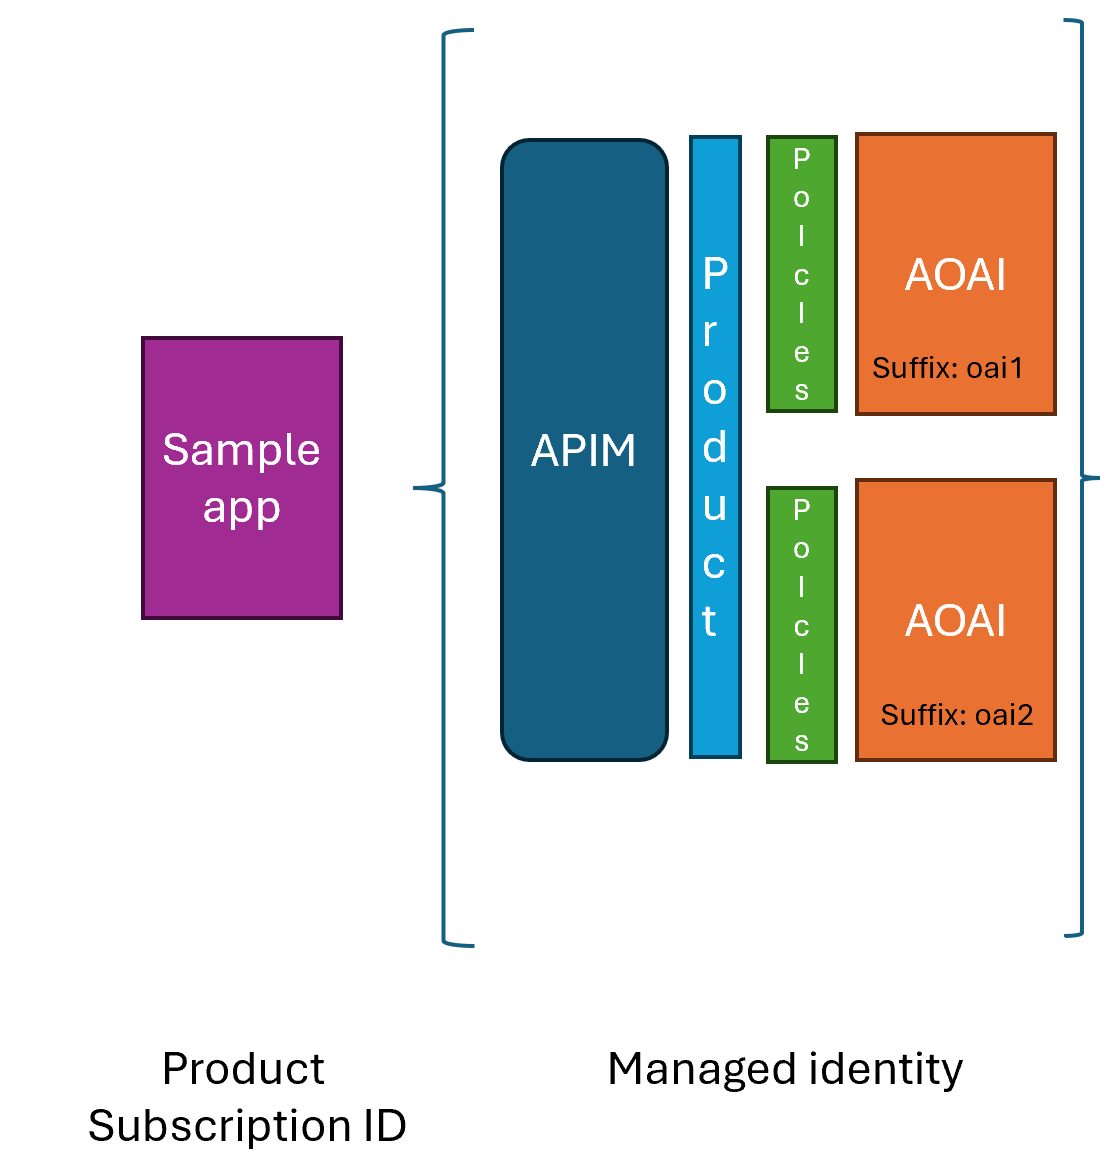 Architecture overview describing sample app interaction with API Management